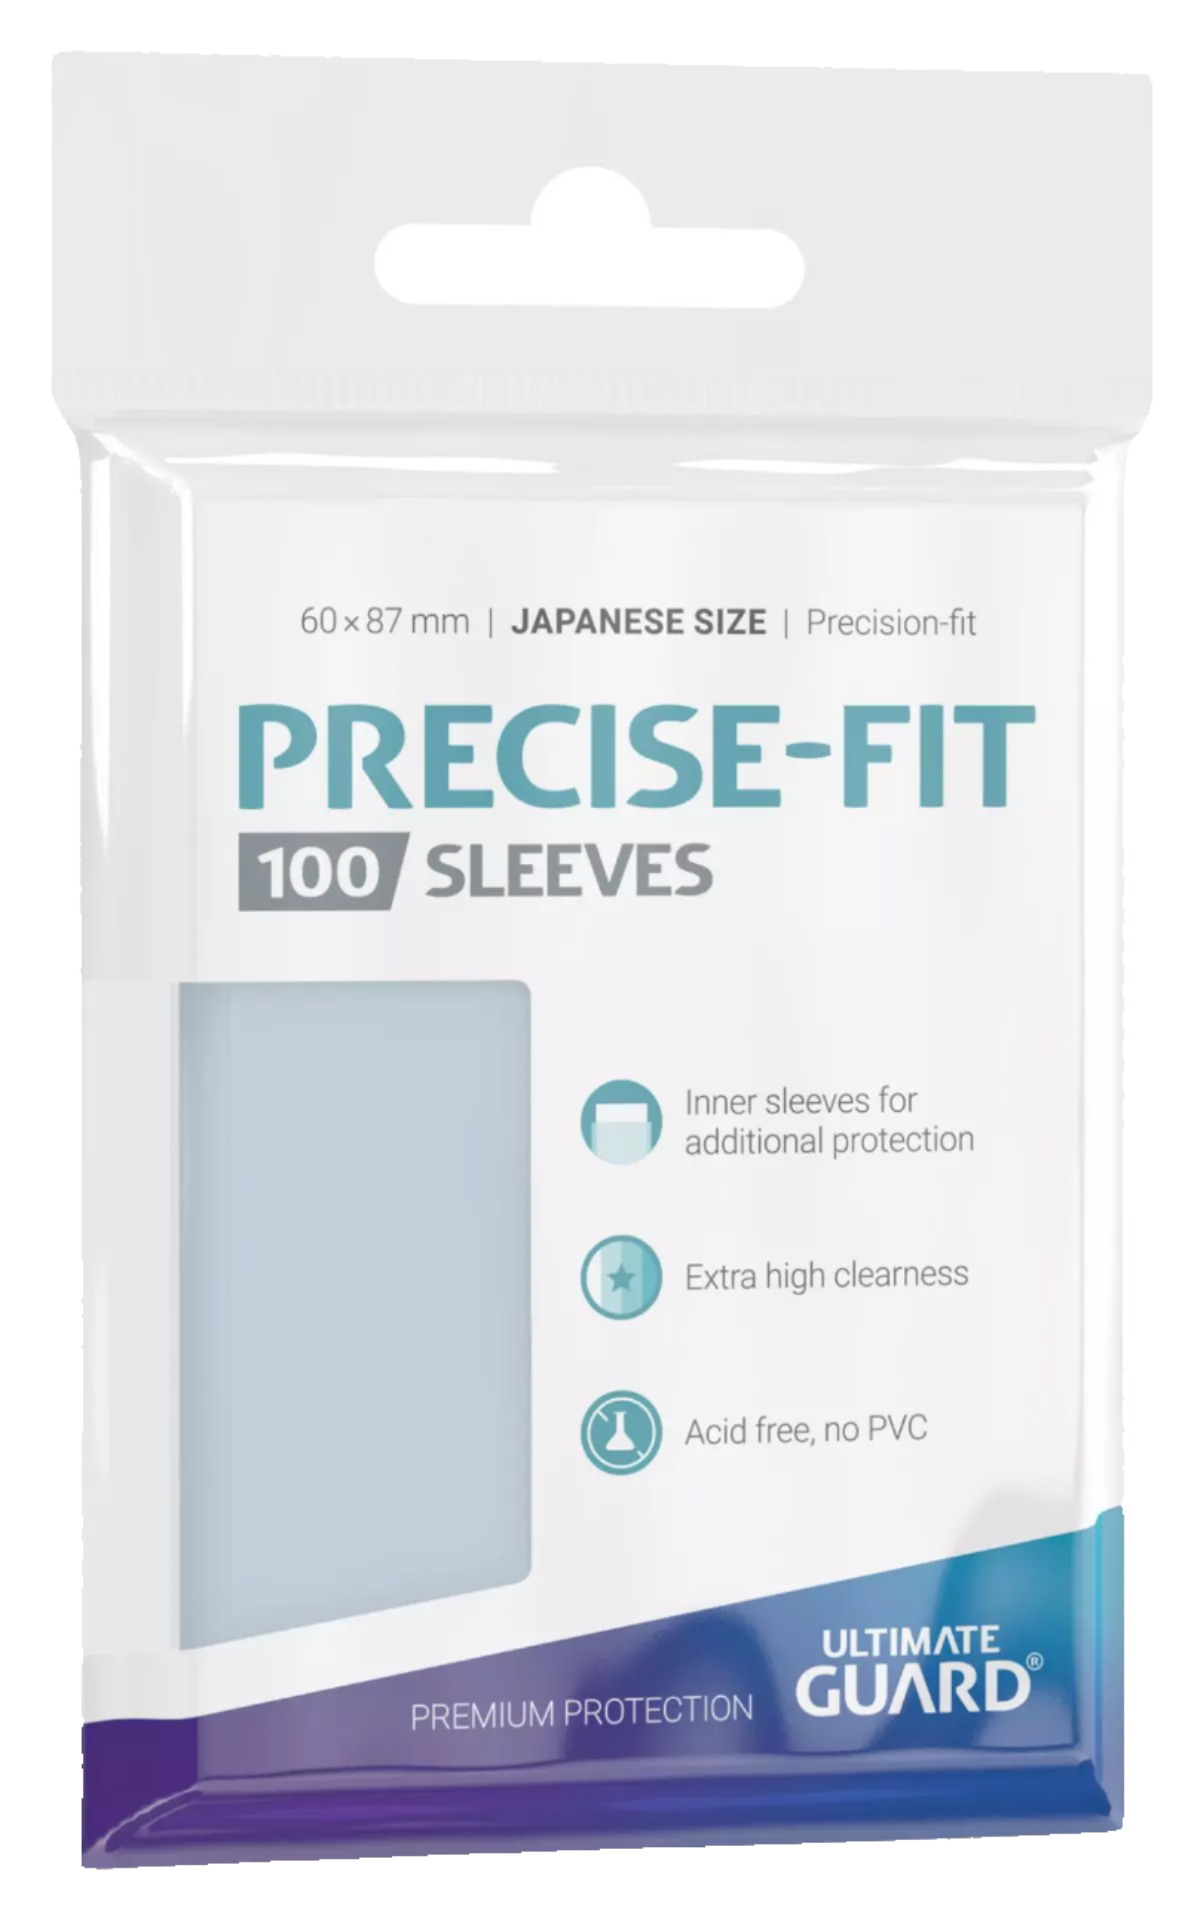 Ultimate Guard - Precise-Fit Sleeves - Japanese Size - Standard - 100pk